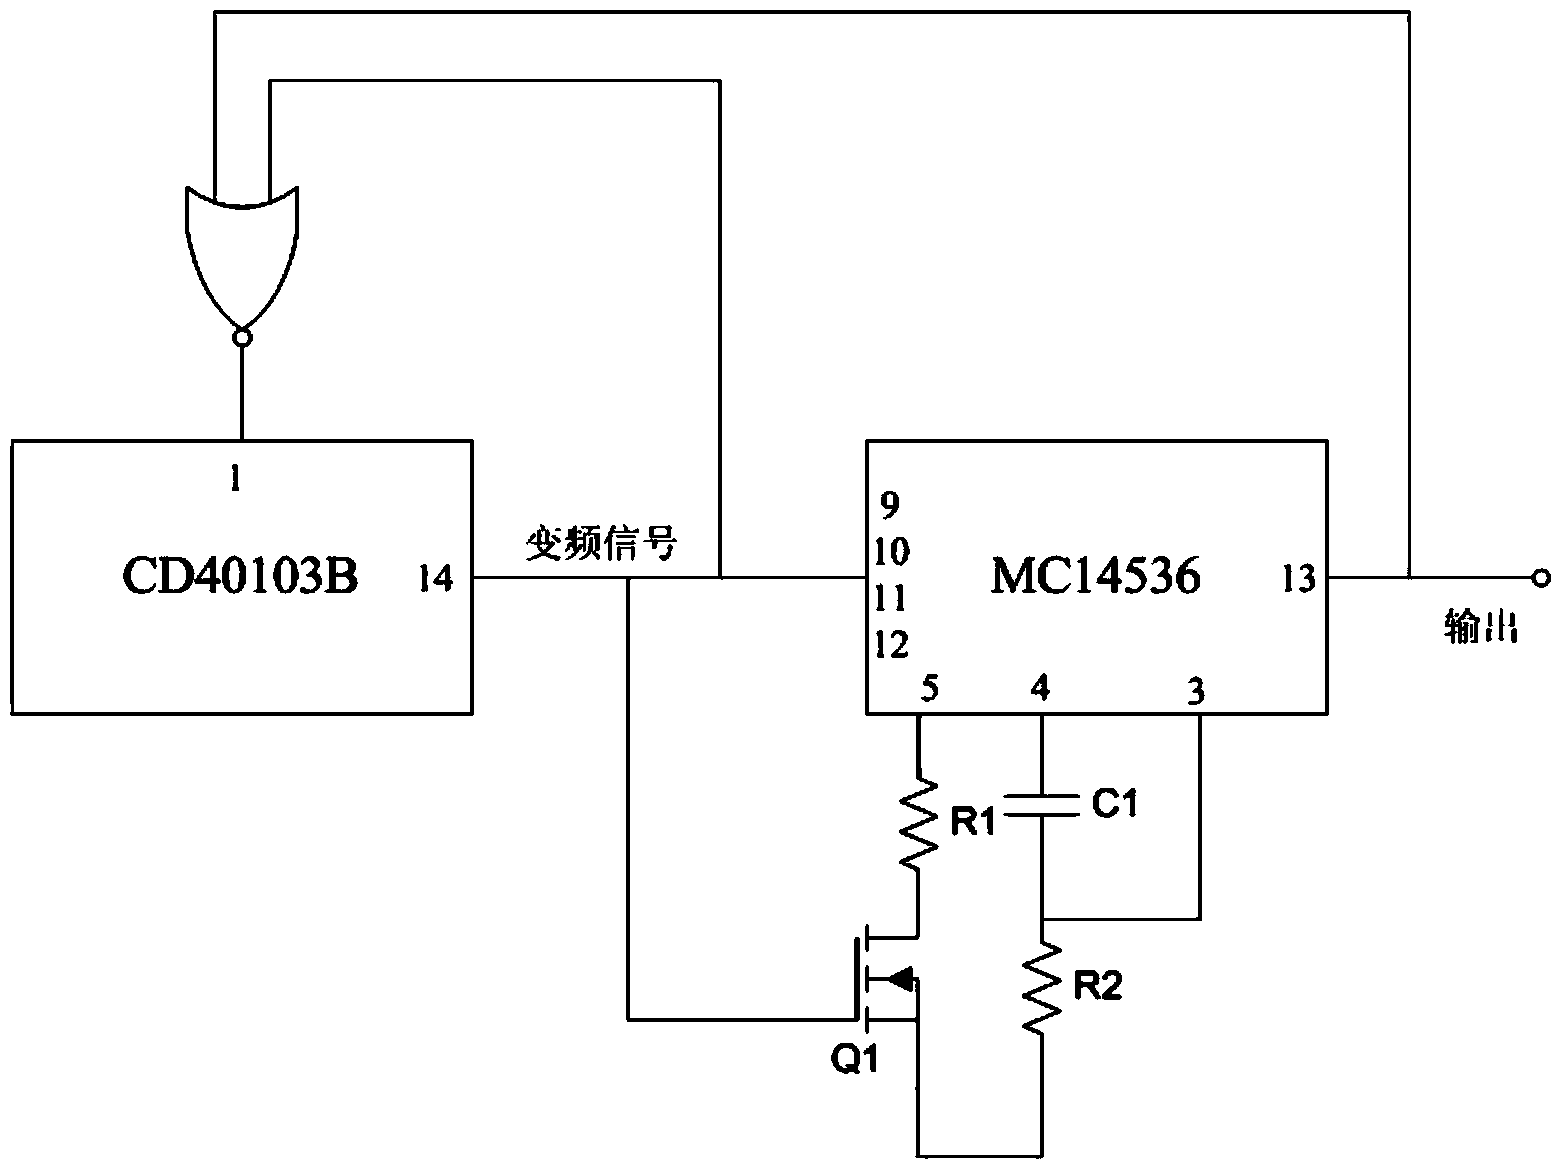 Digital frequency conversion discharging control circuit and method for achieving frequency conversion